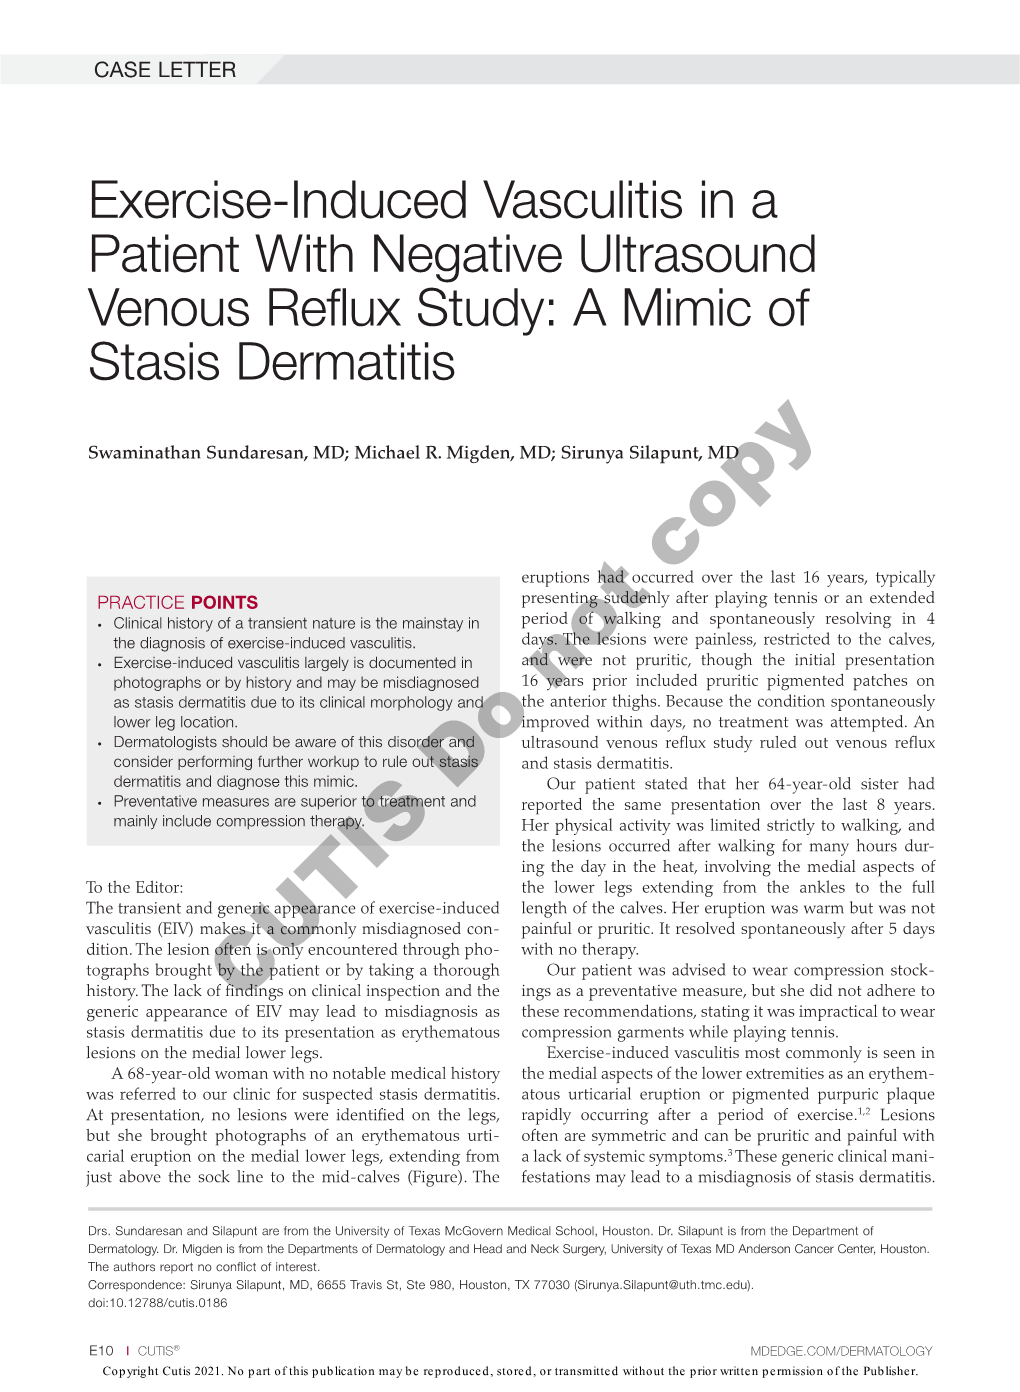 Exercise-Induced Vasculitis in a Patient with Negative Ultrasound Venous Reflux Study: a Mimic of Stasis Dermatitis